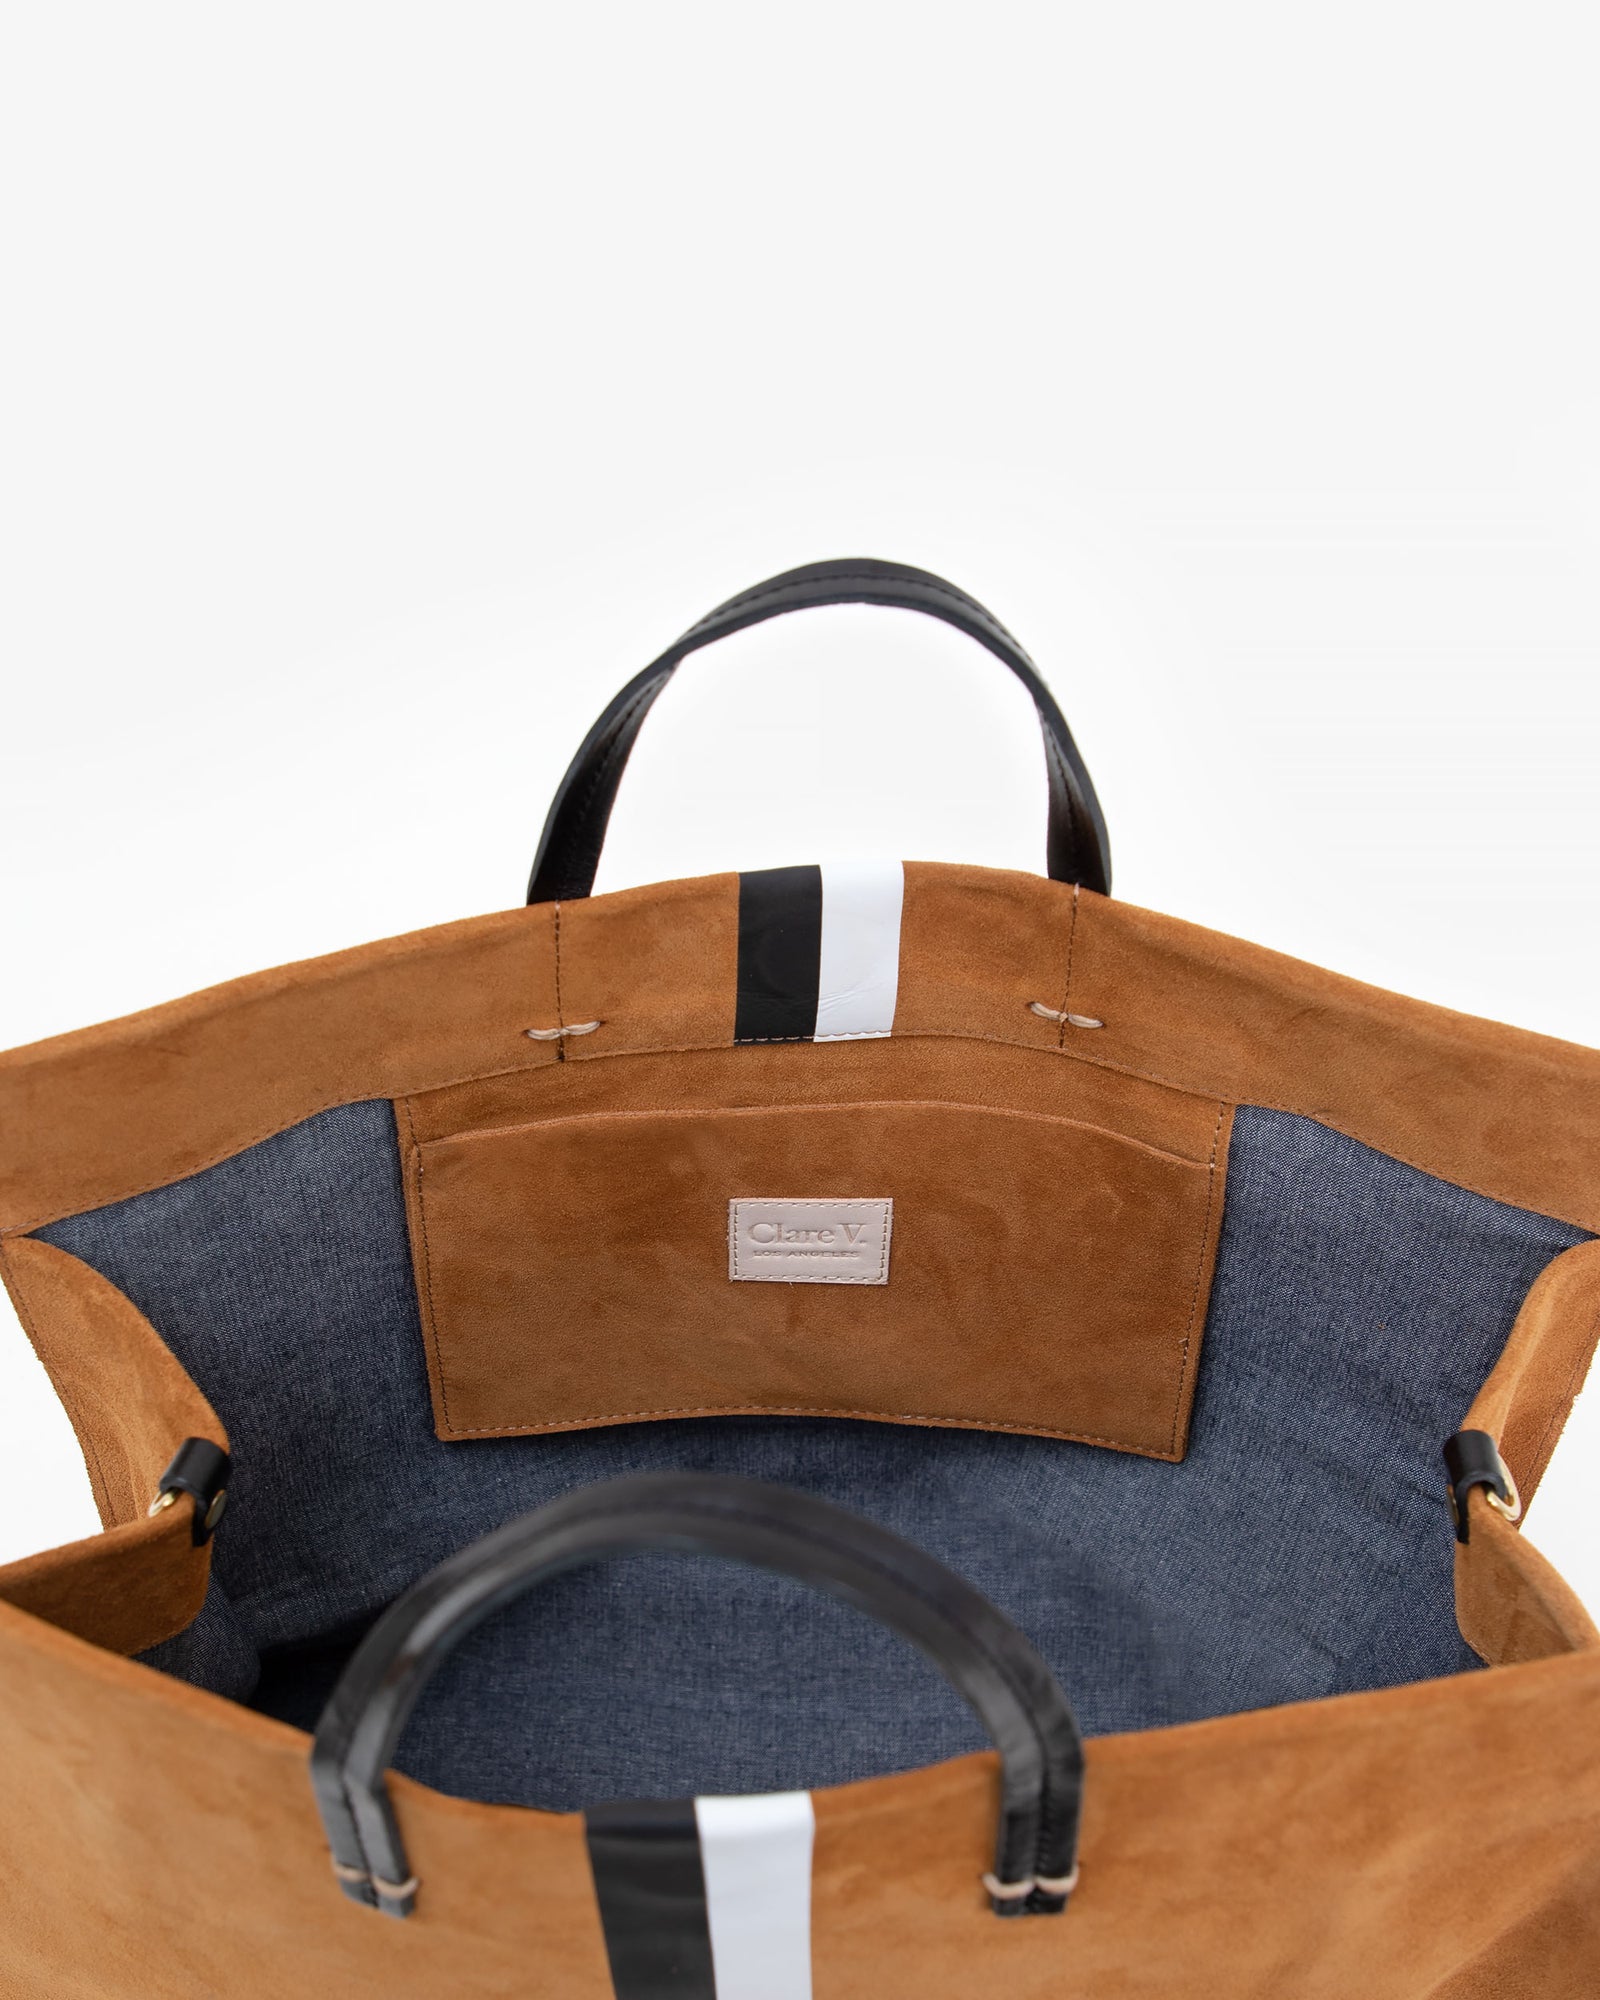 Inside of The Simple Tote in Camel Suede w/Black & White Stripes - Showing The Inside Pocket